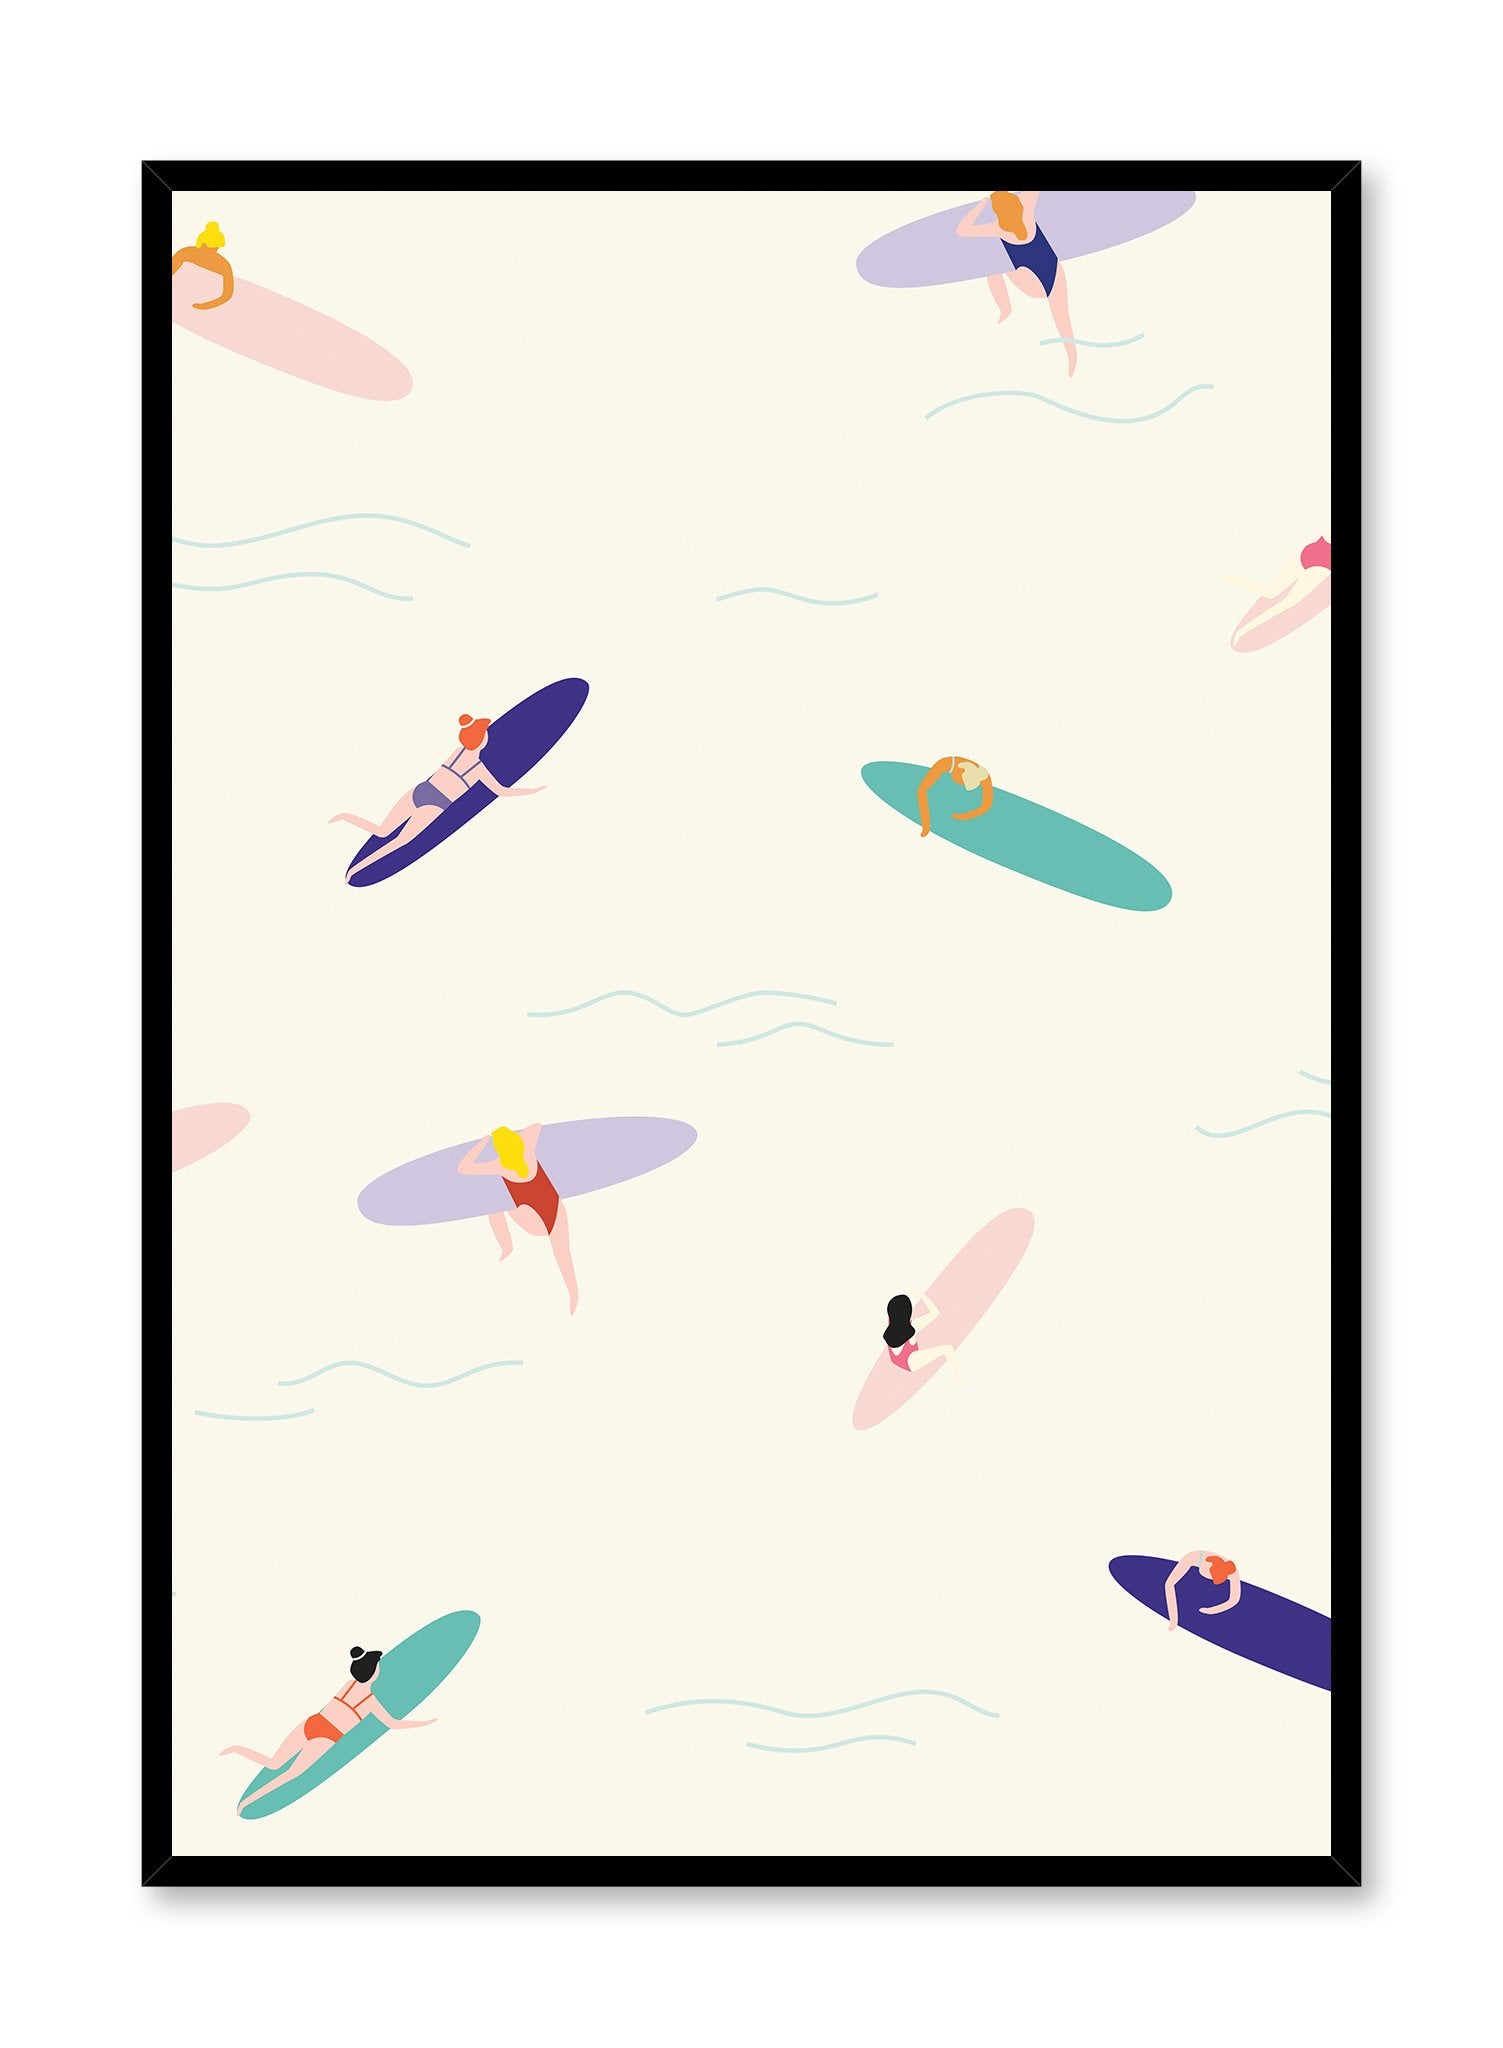 Surf’s Up! is a retro illustration poster of surfers enjoying the waves by Opposite Wall.